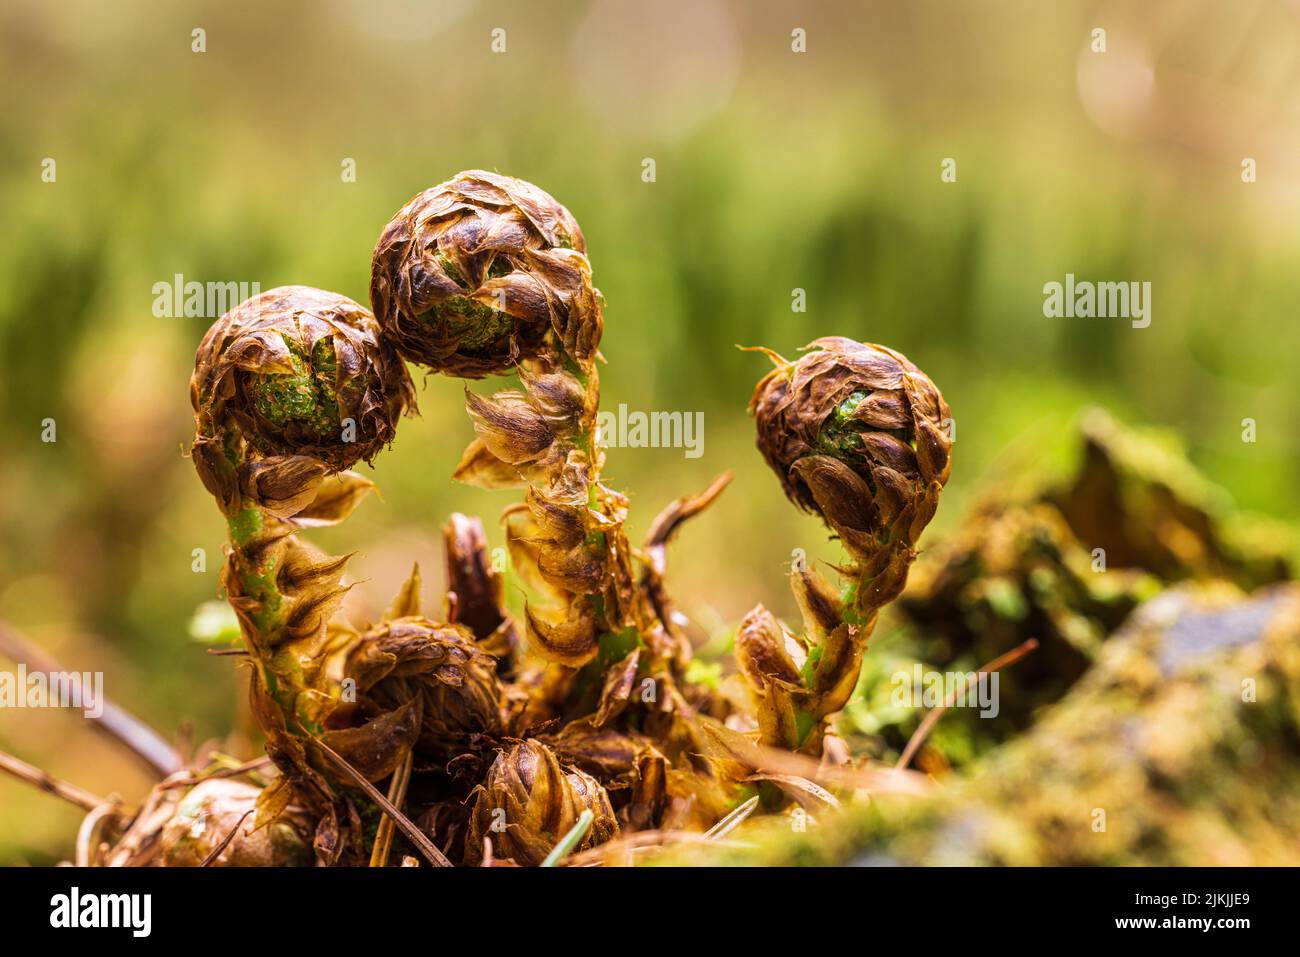 Fern in spring, fresh and ready to unfold Stock Photo